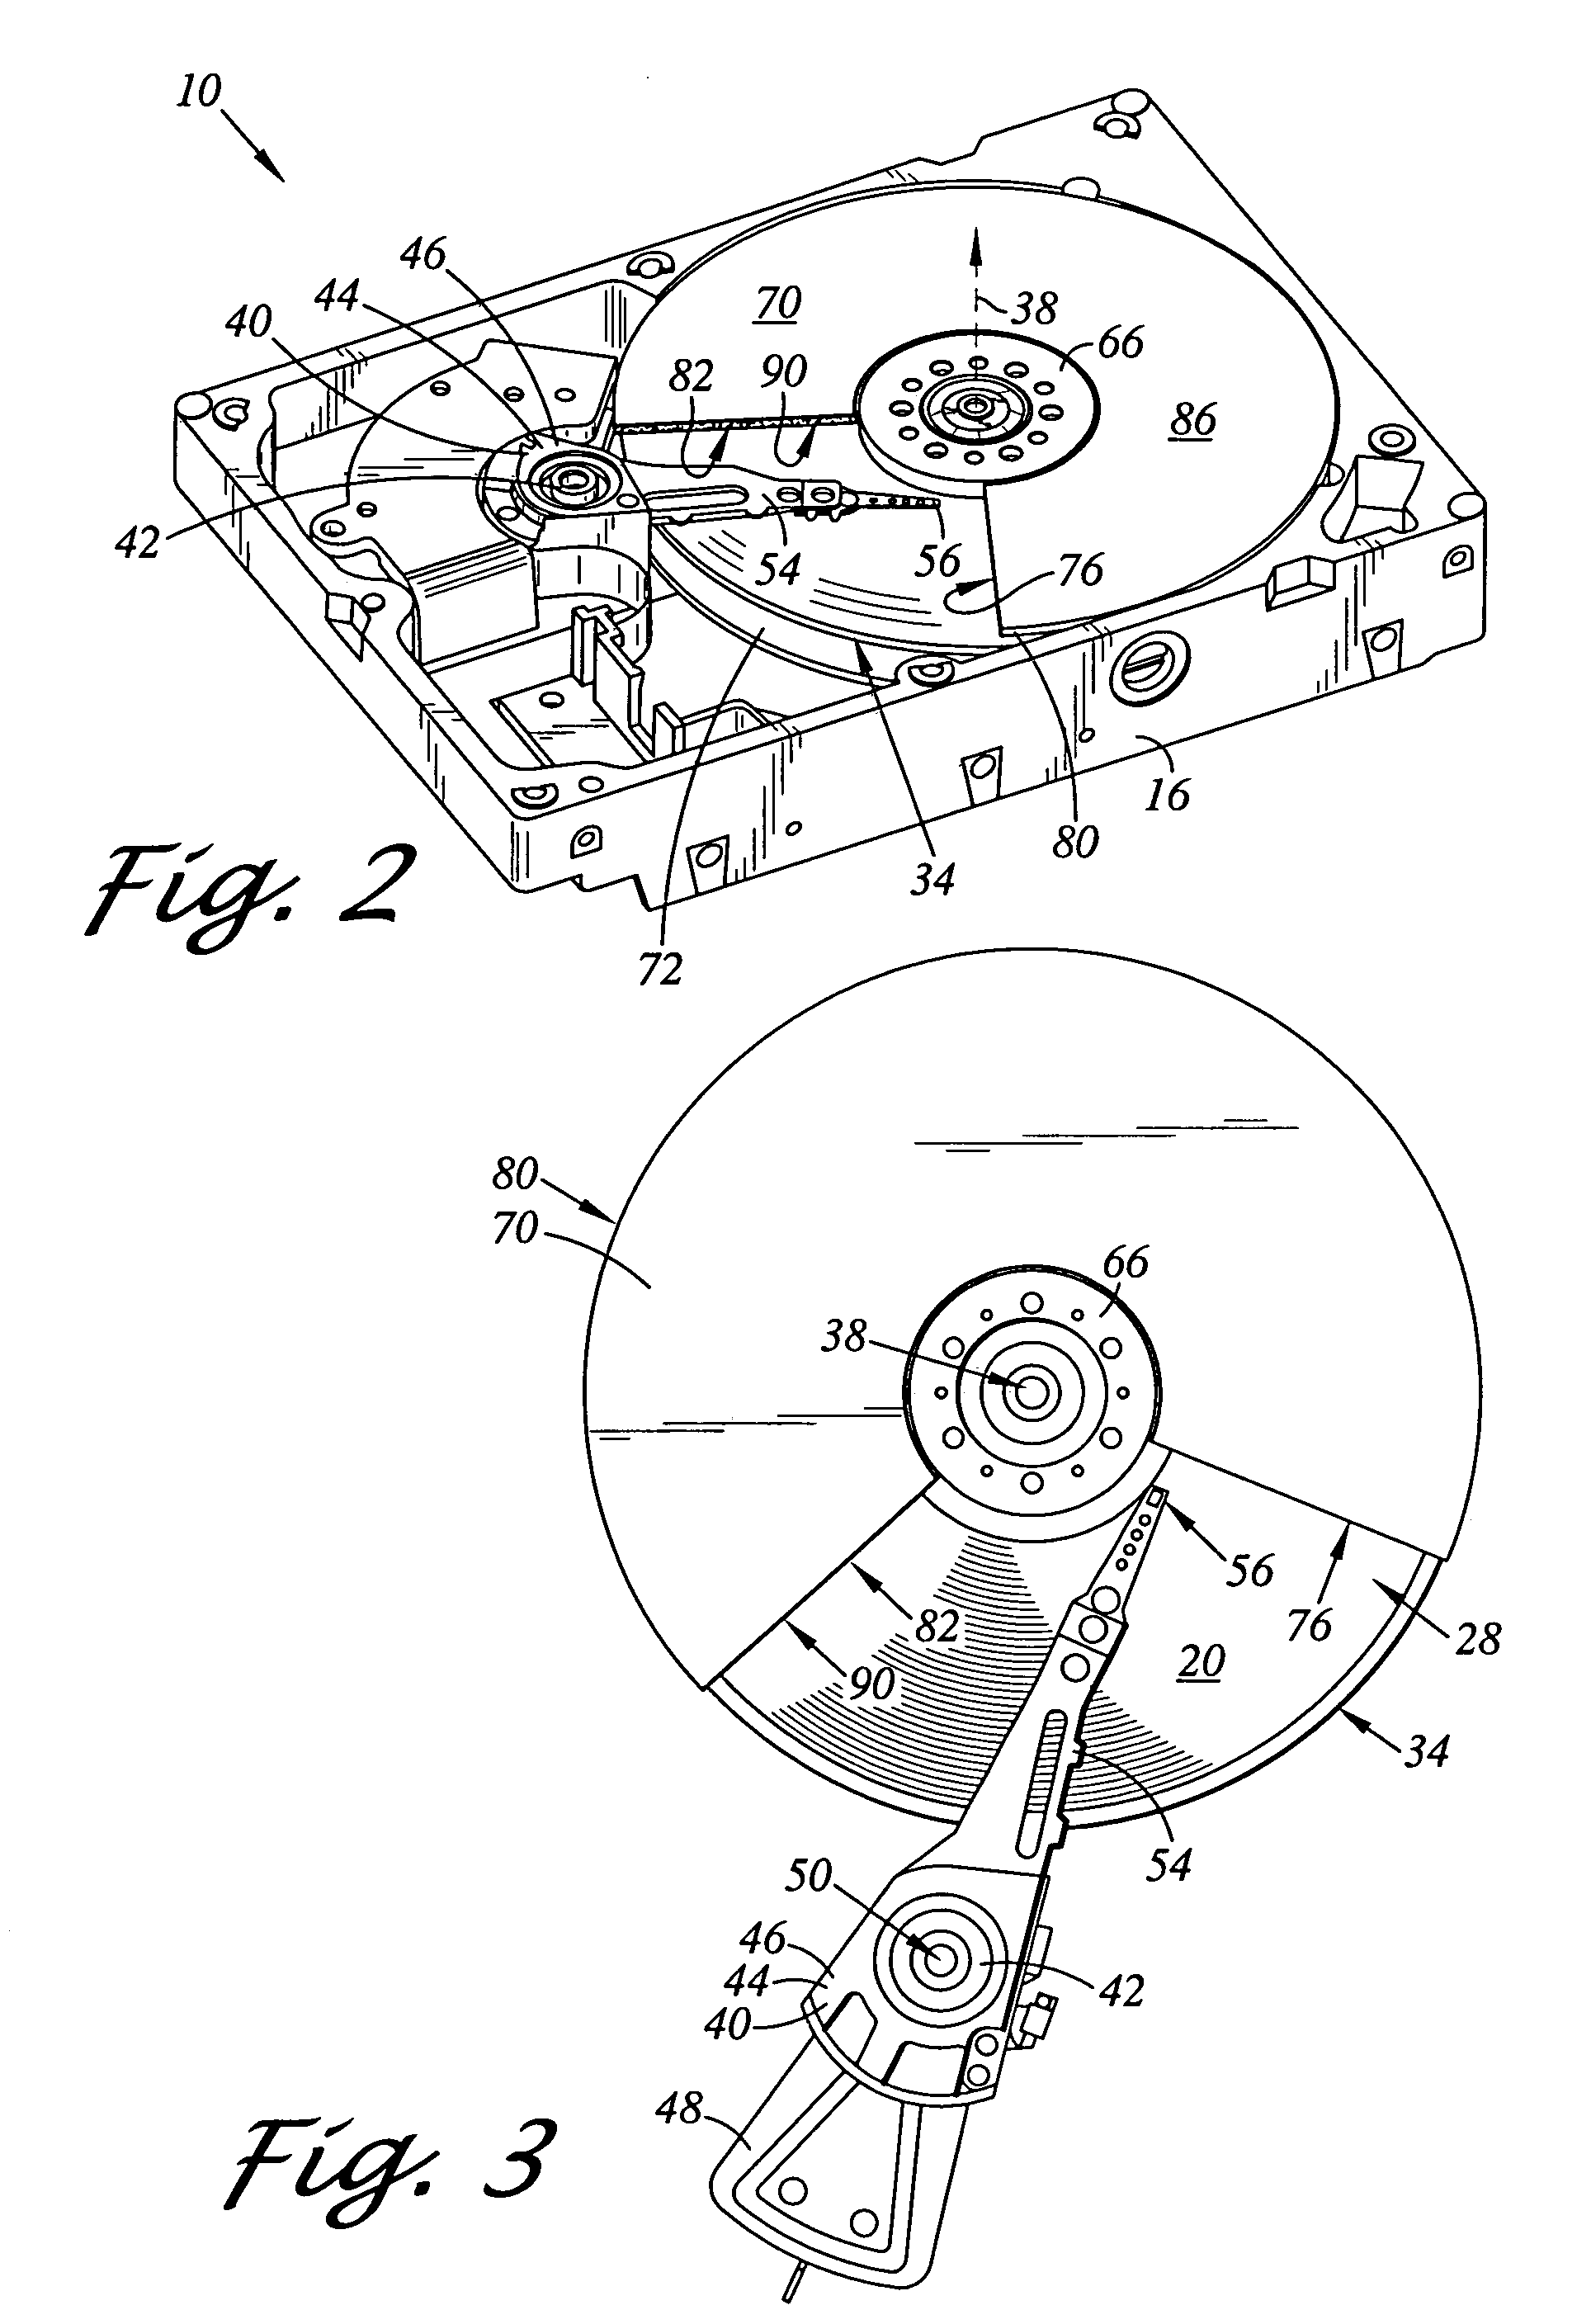 Disk drive with airflow channeling enclosure